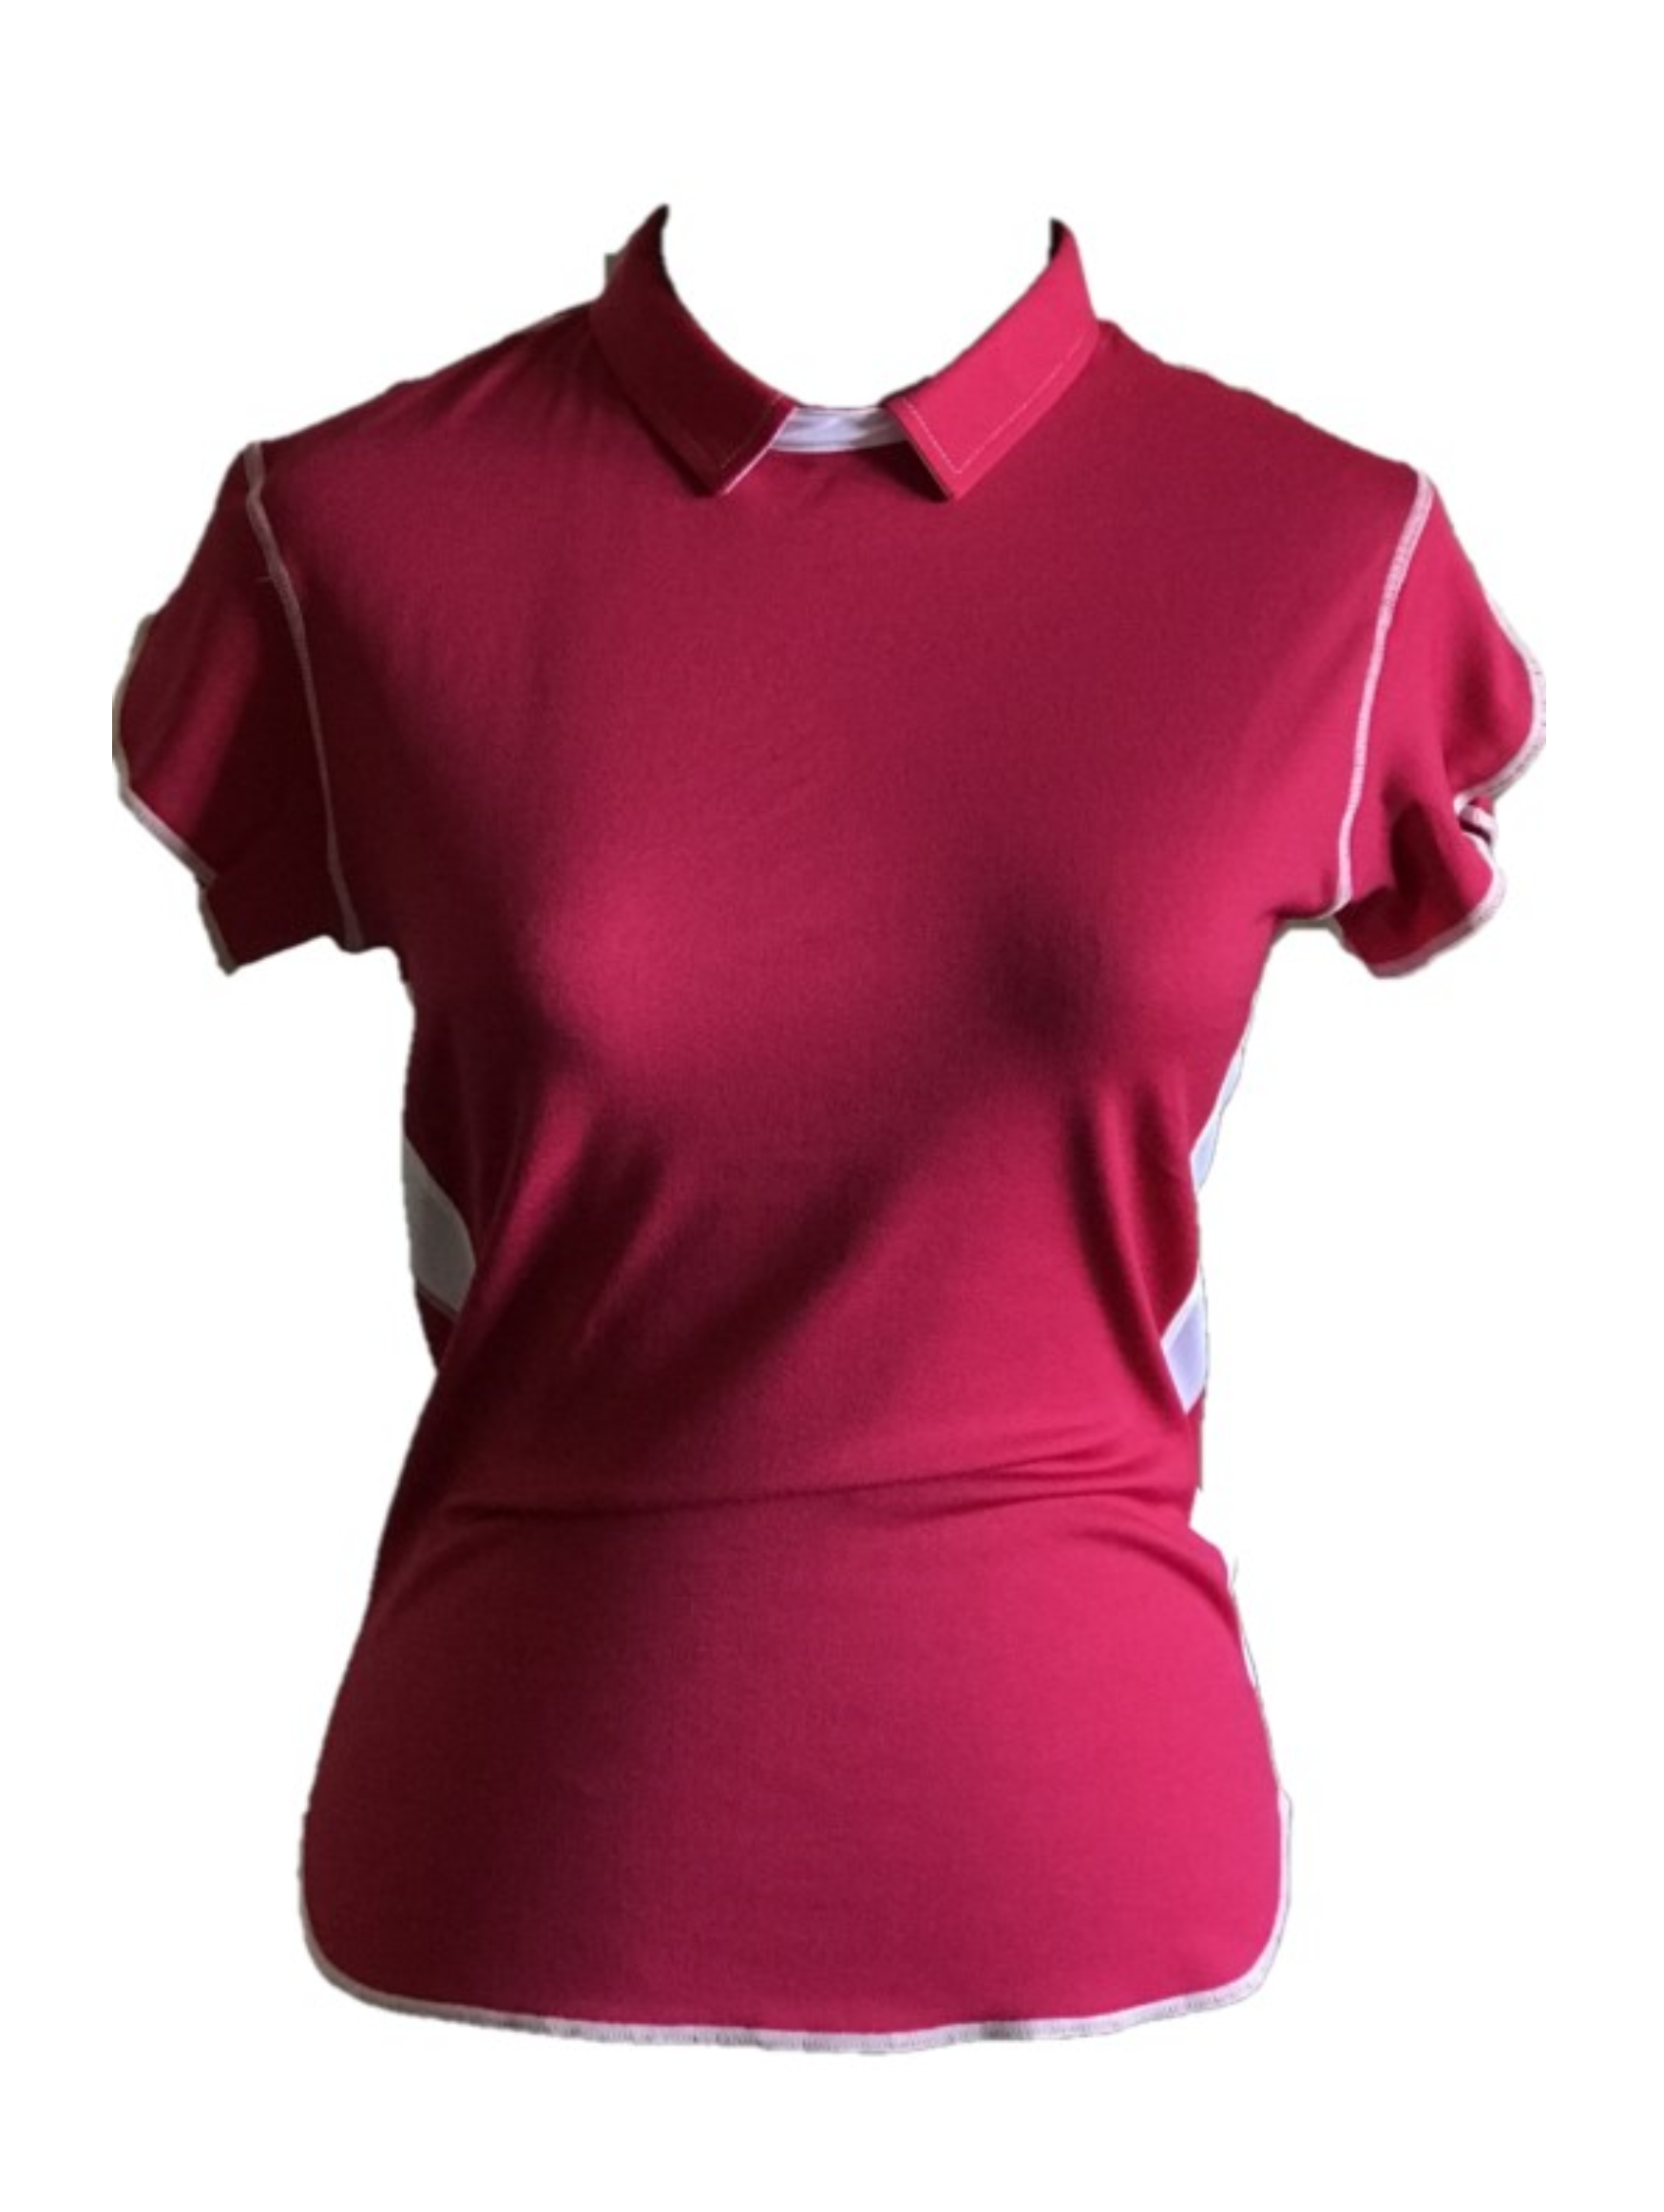 LT-082F || Ladies Top Dark Pink with White Breathable Side Panels and White Overlock